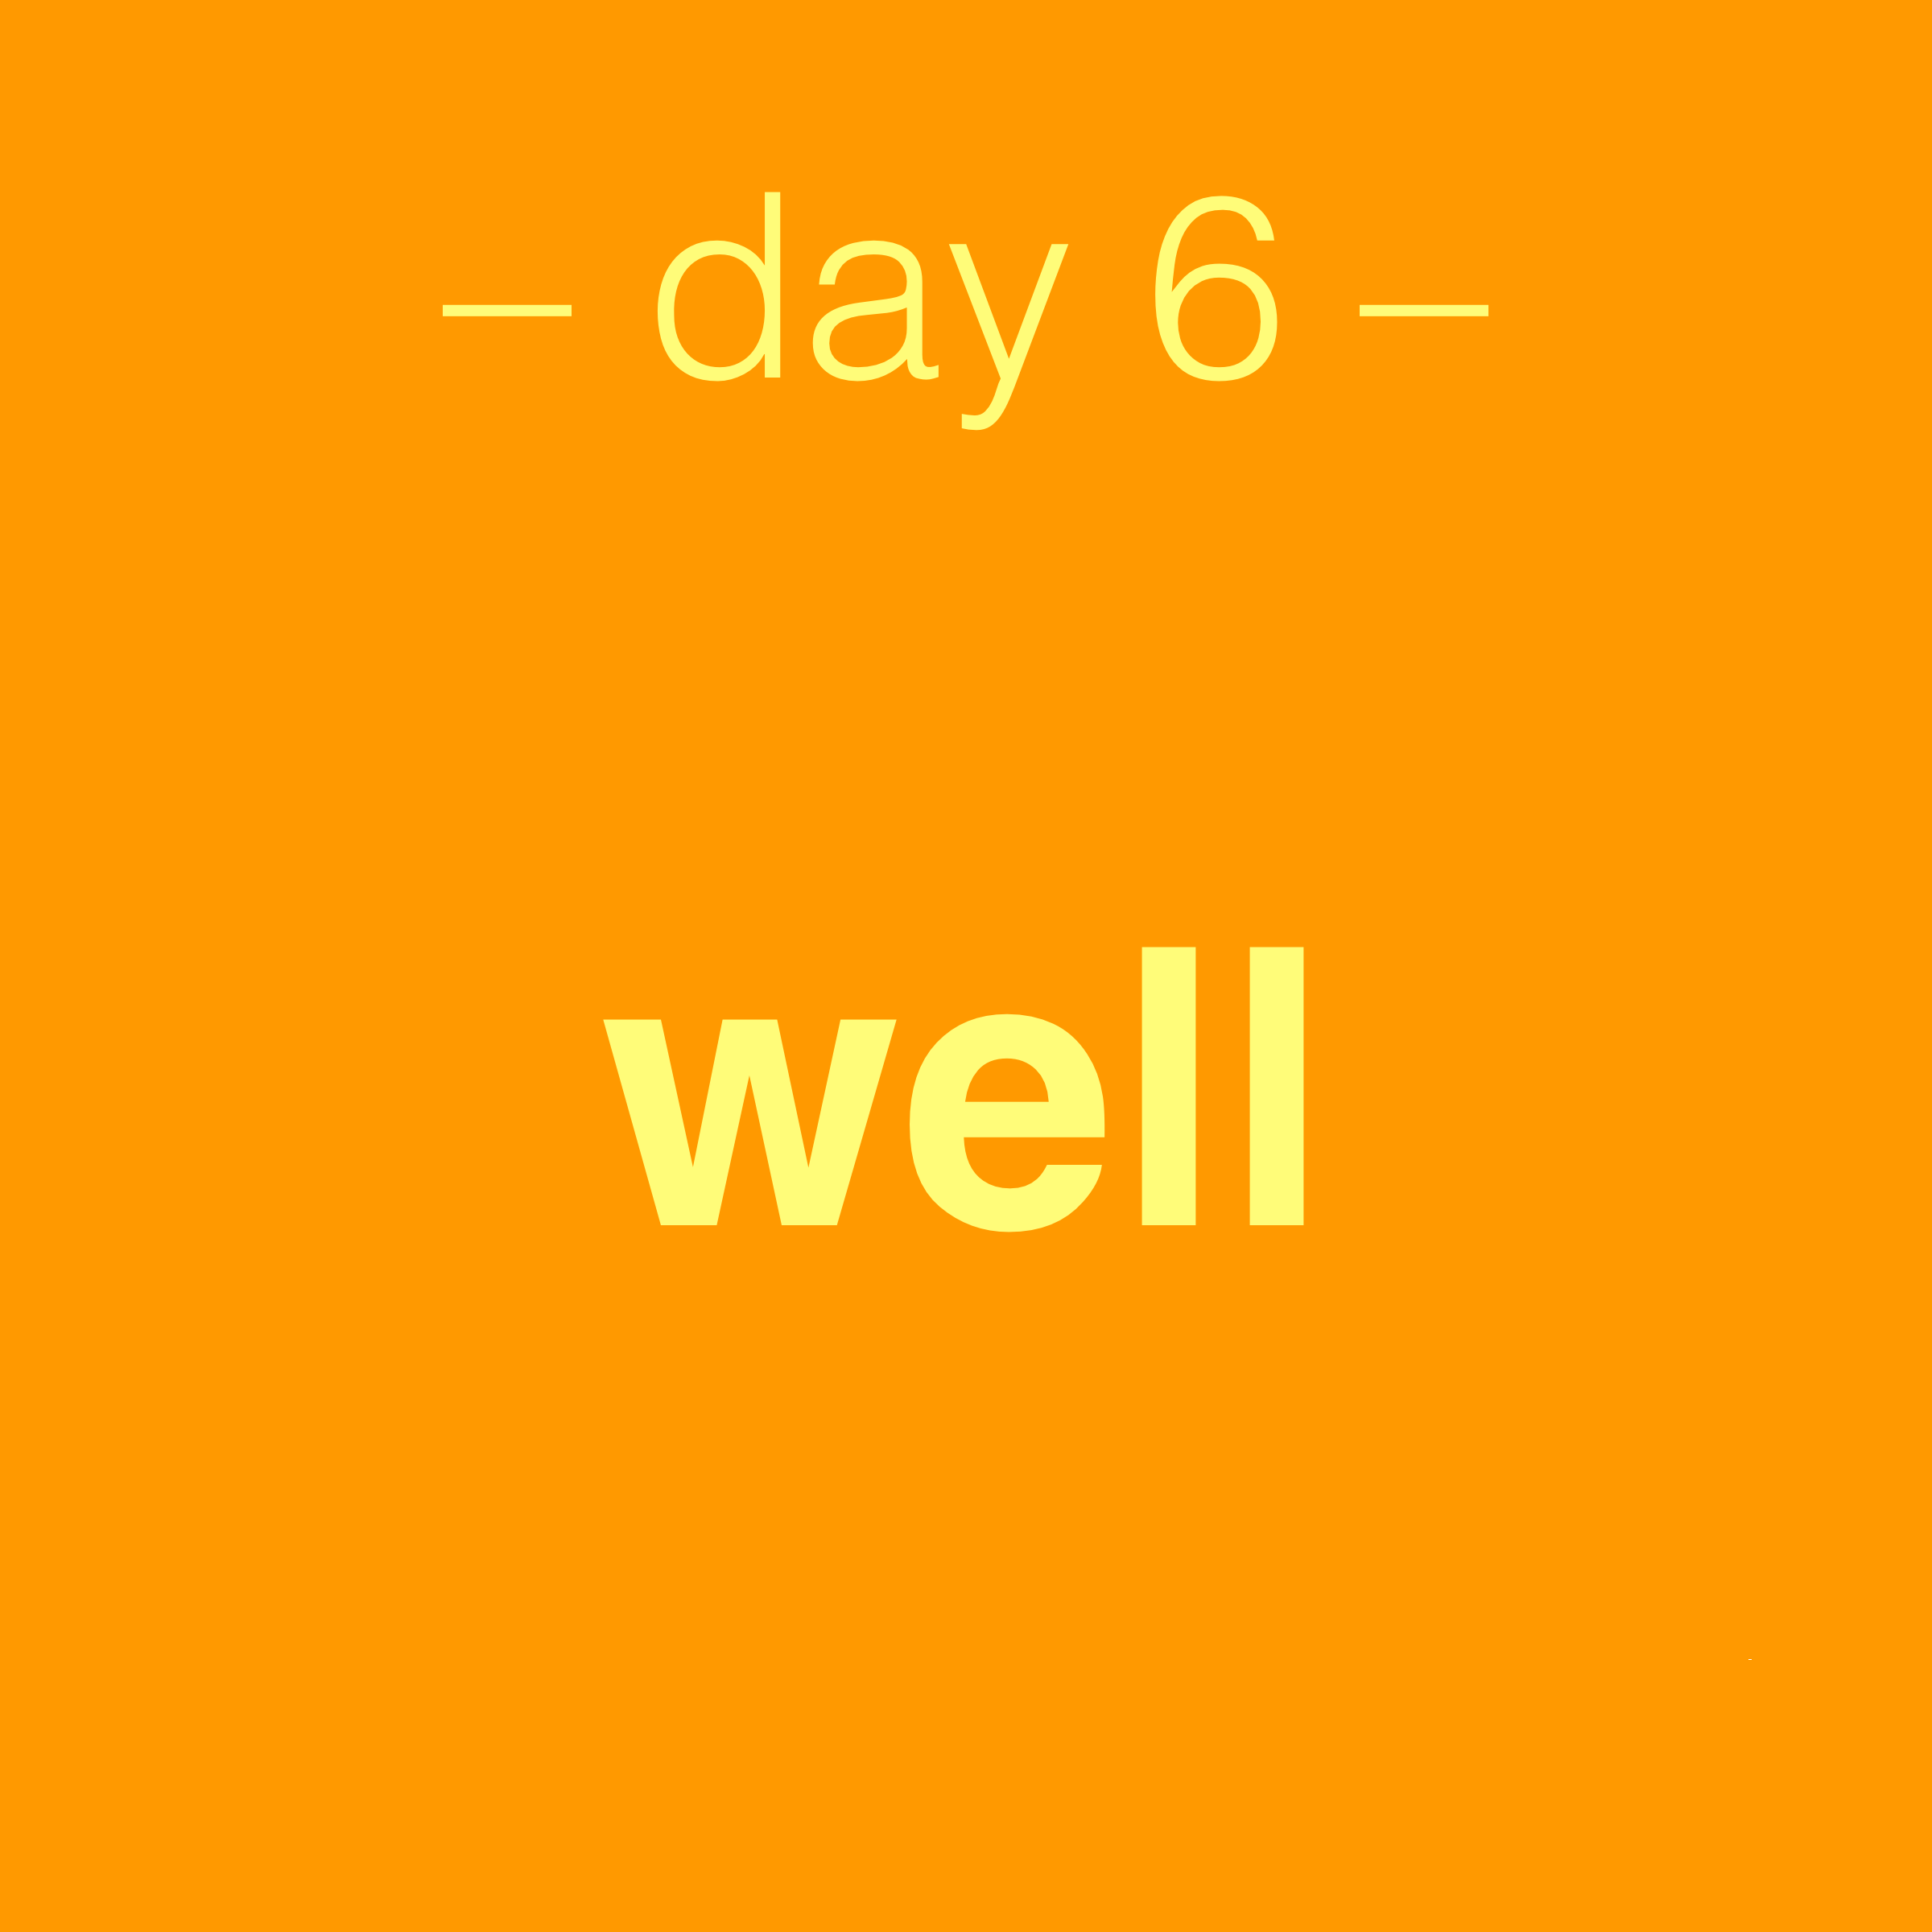 day 6: well